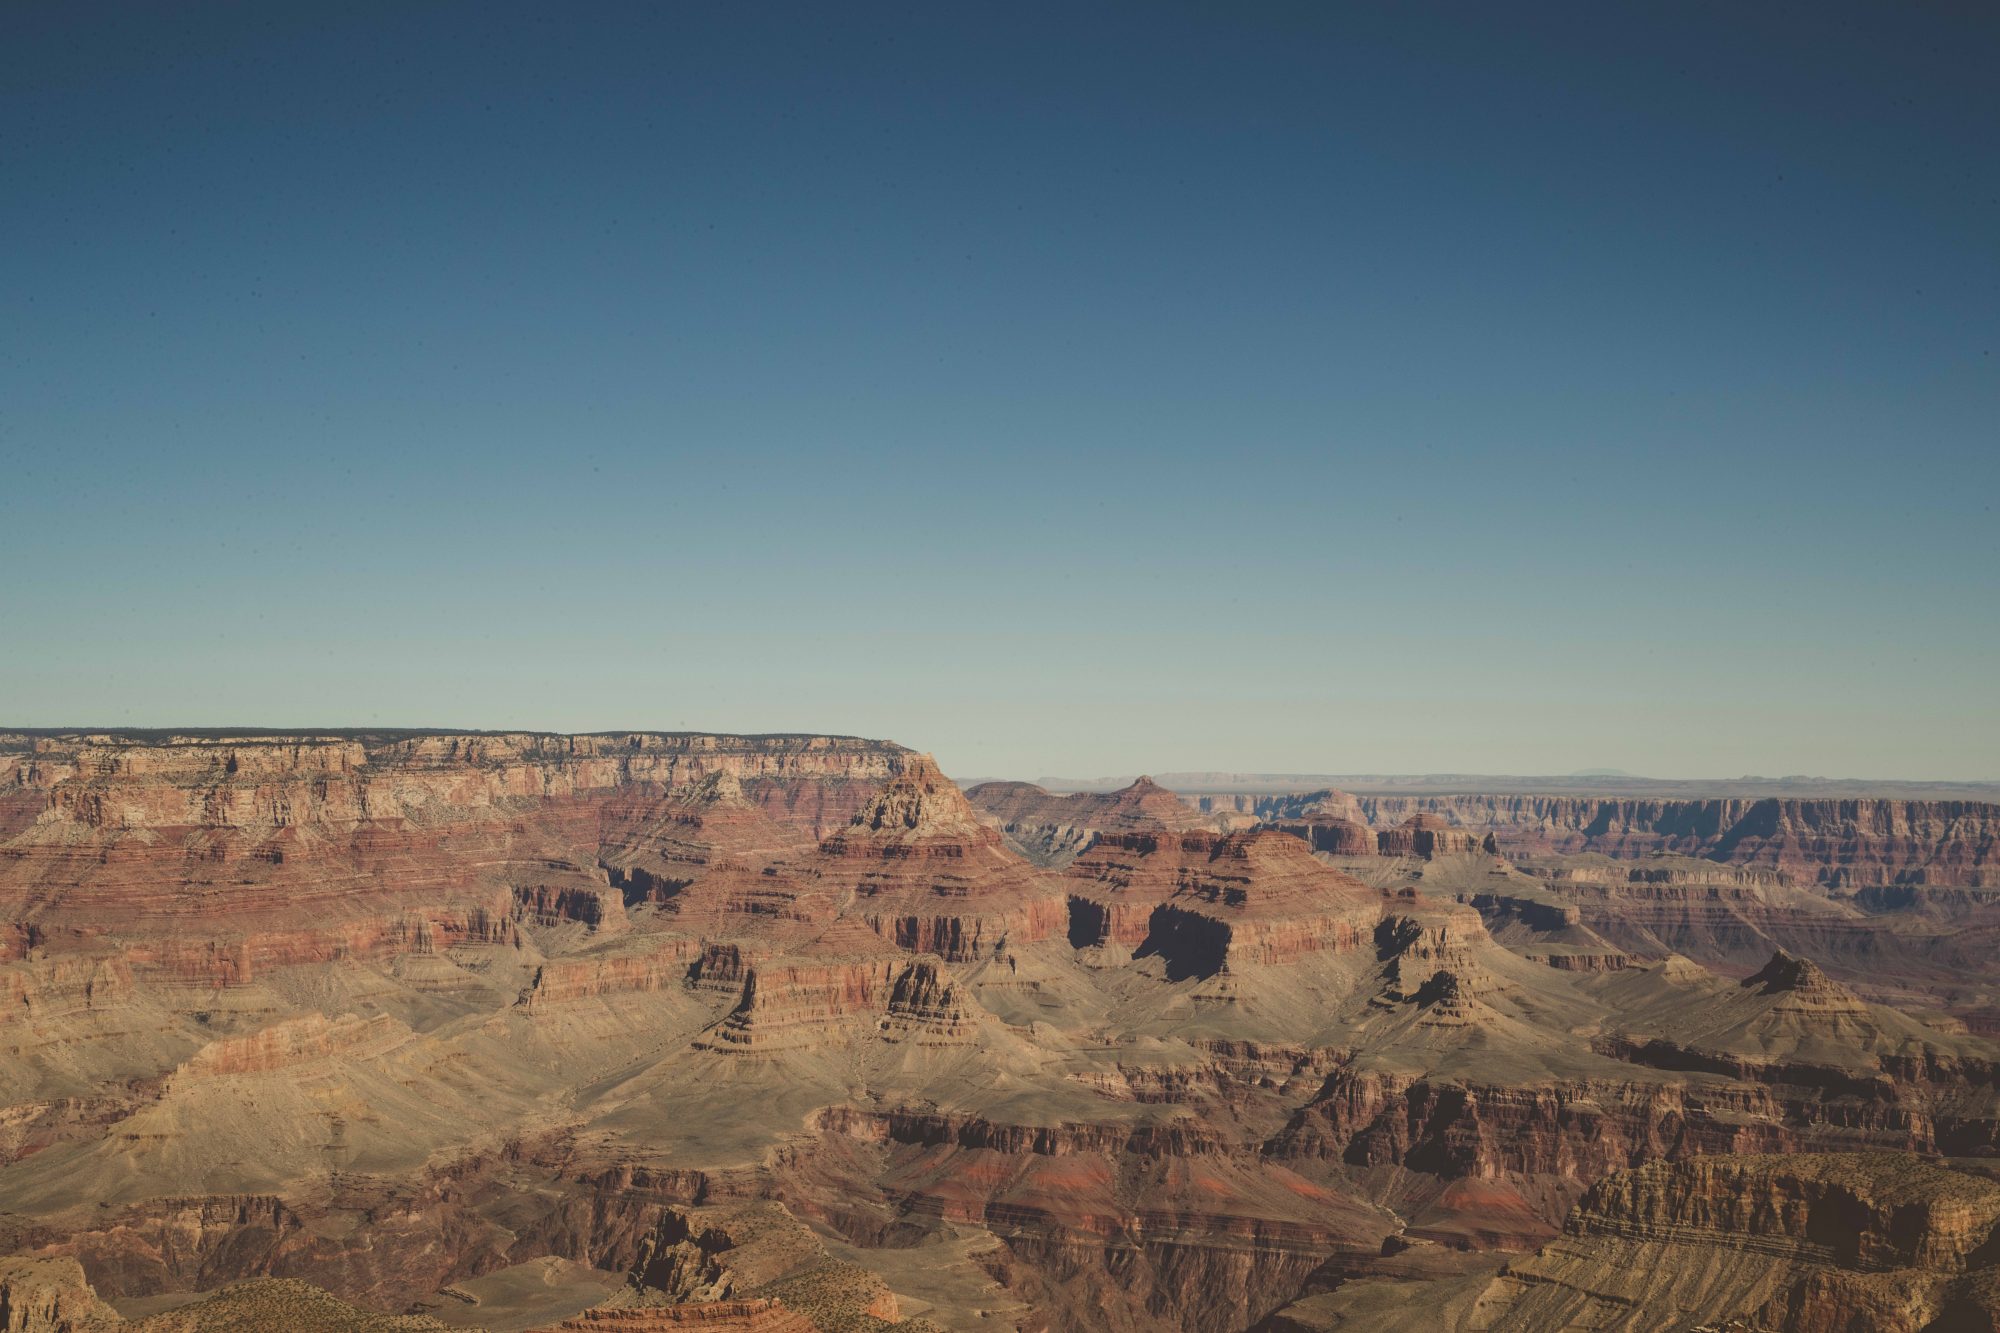 Late afternoon view of the Grand Canyon